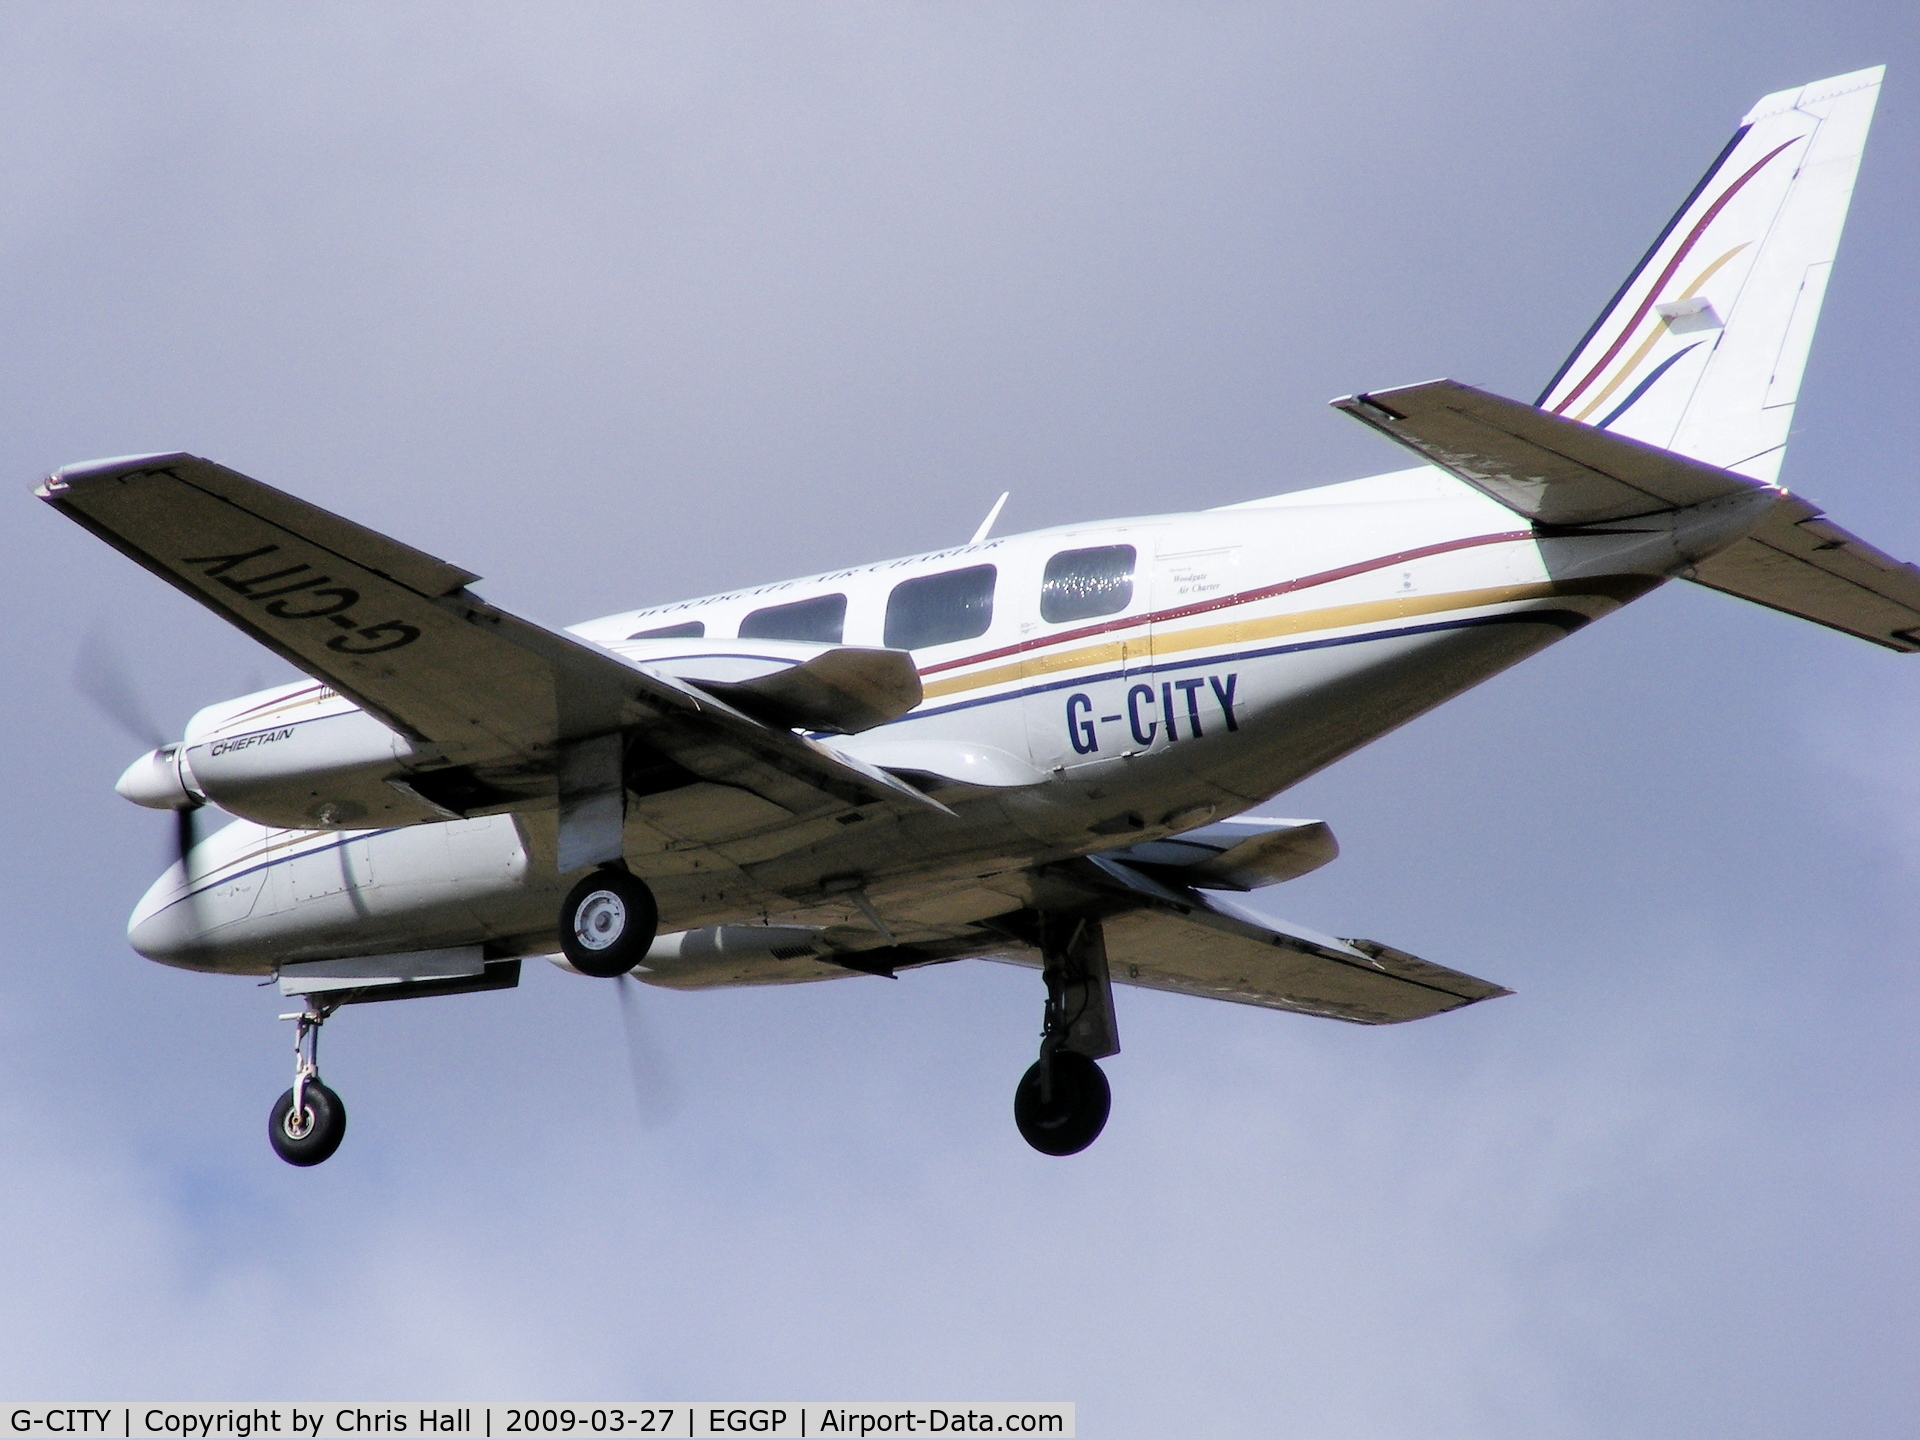 G-CITY, 1978 Piper PA-31-350 Navajo Chieftain Chieftain C/N 31-7852136, Woodgate Aviation